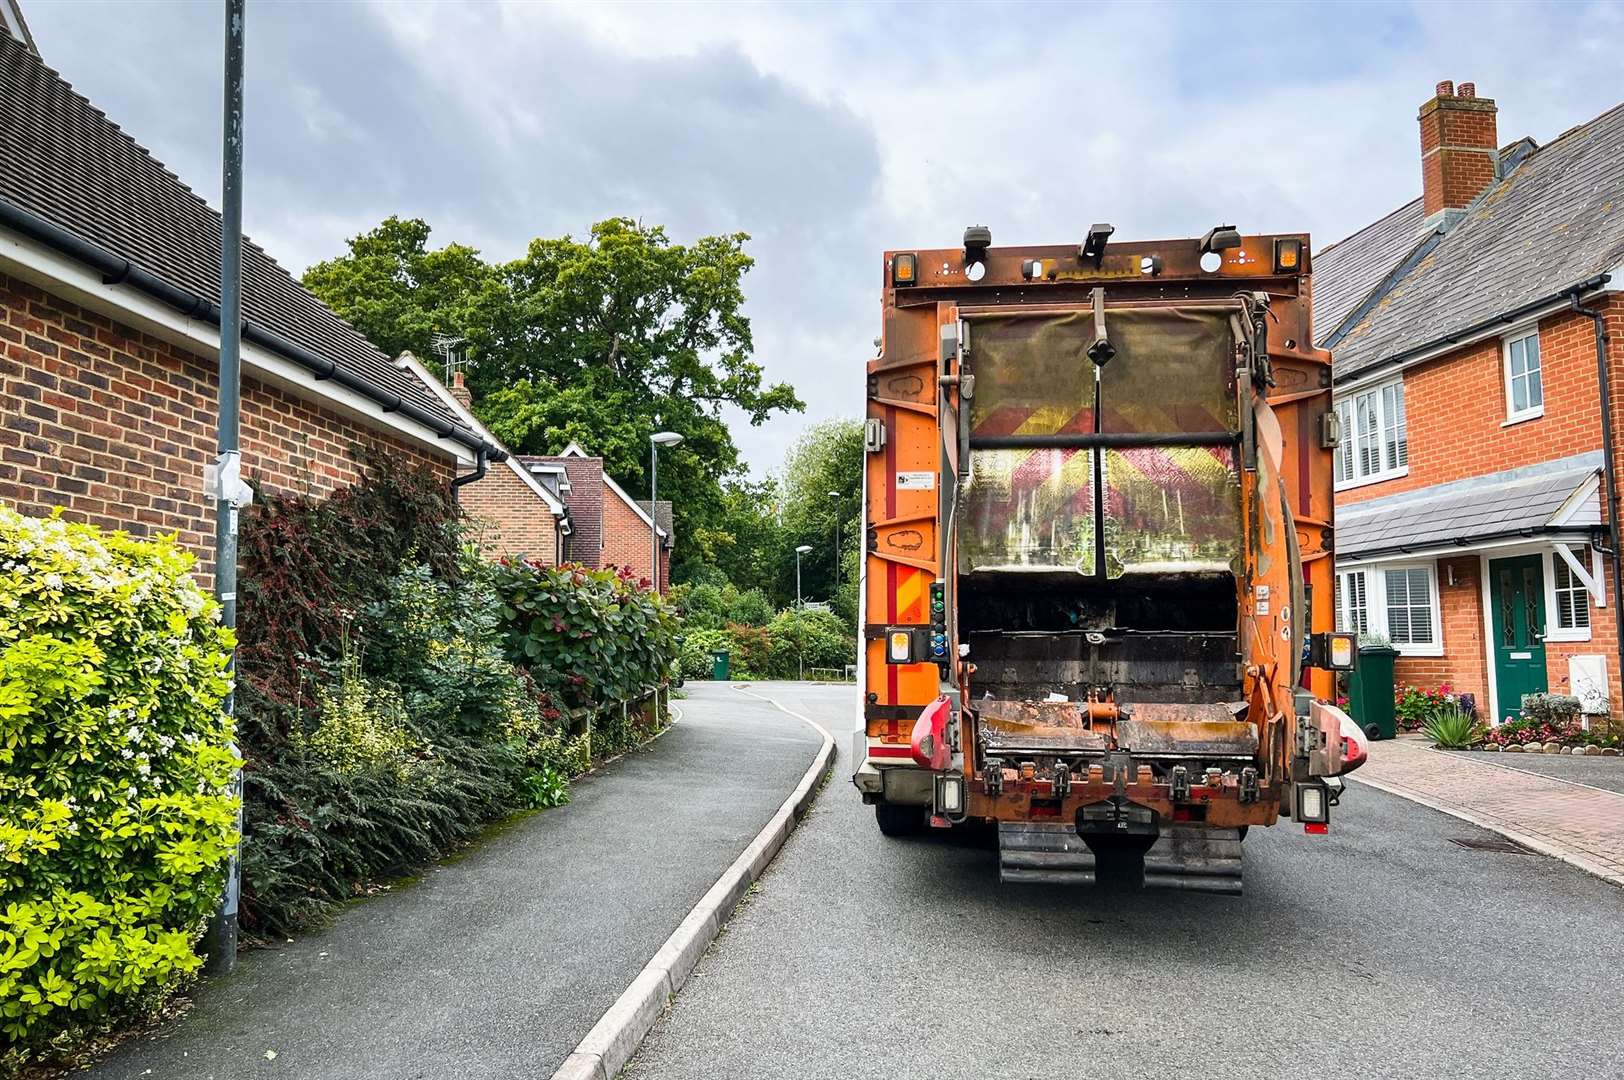 Simpler Recycling regulations could overhaul the ways in which councils collect waste. Image: iStock.